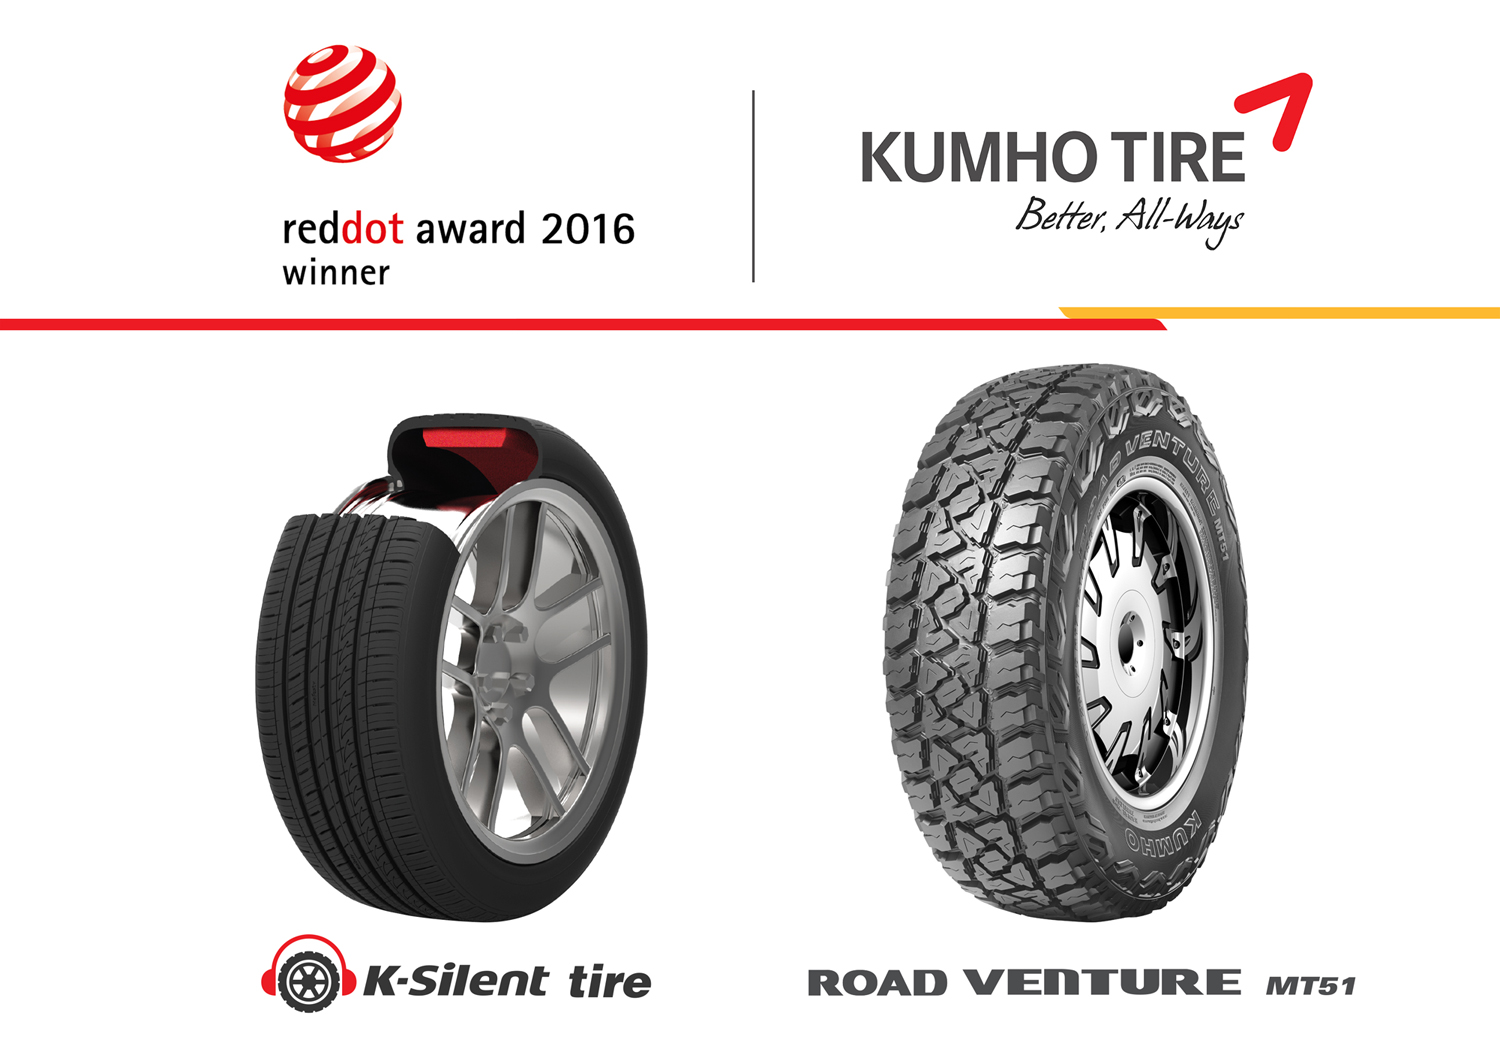 Two Kumho tyres receive Red Dot awards